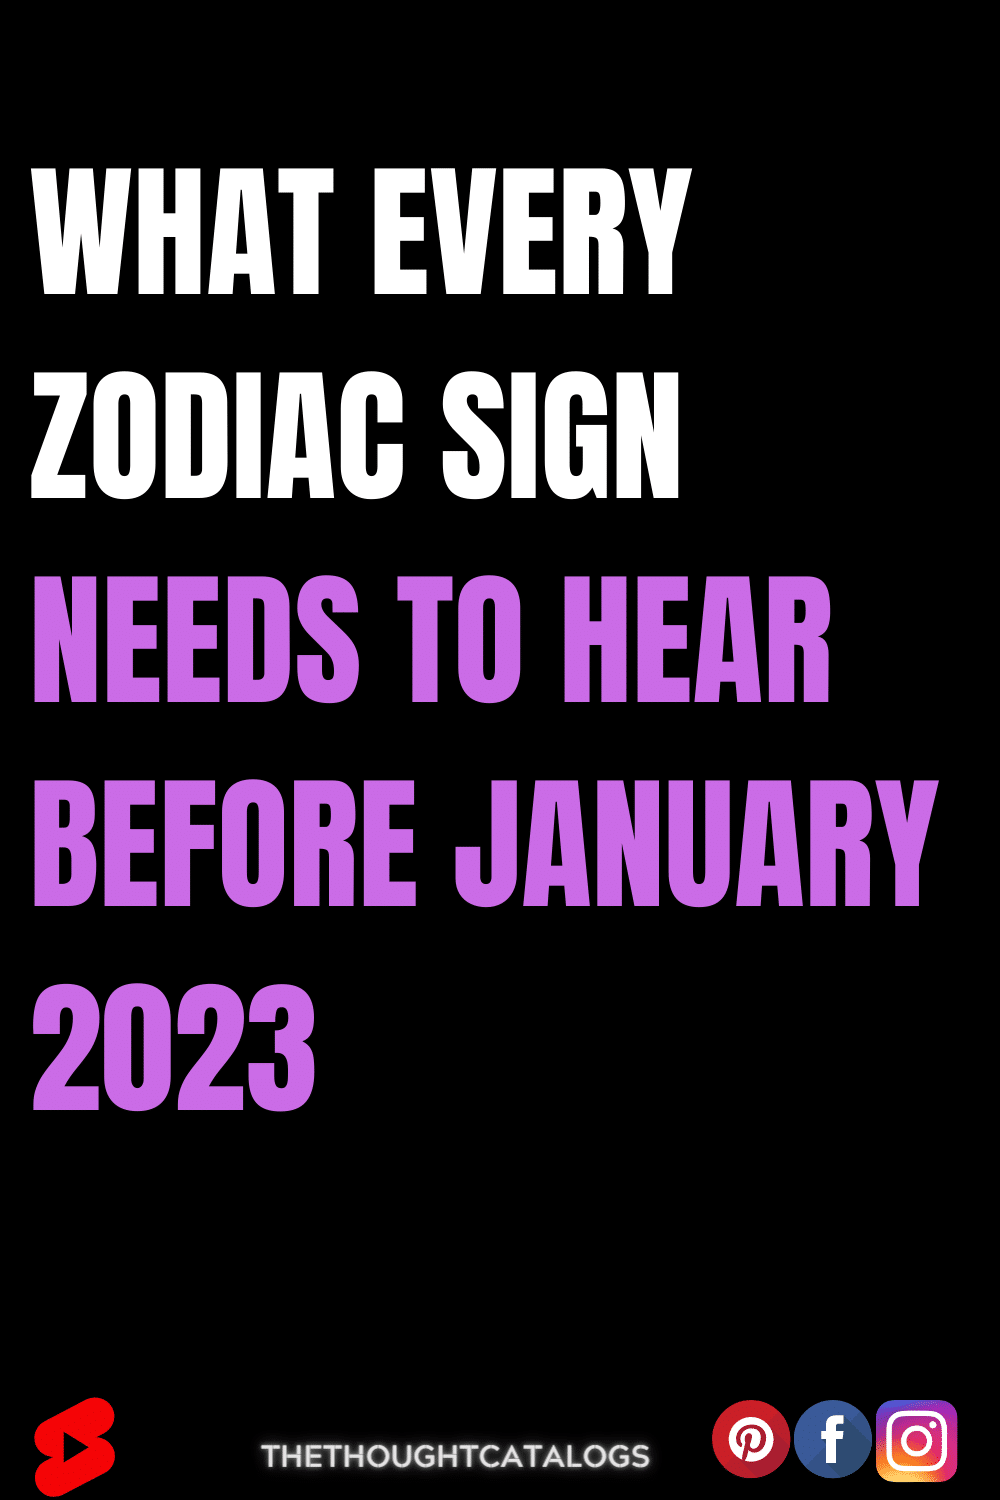 What Every Zodiac Sign Needs To Hear Before January 2023